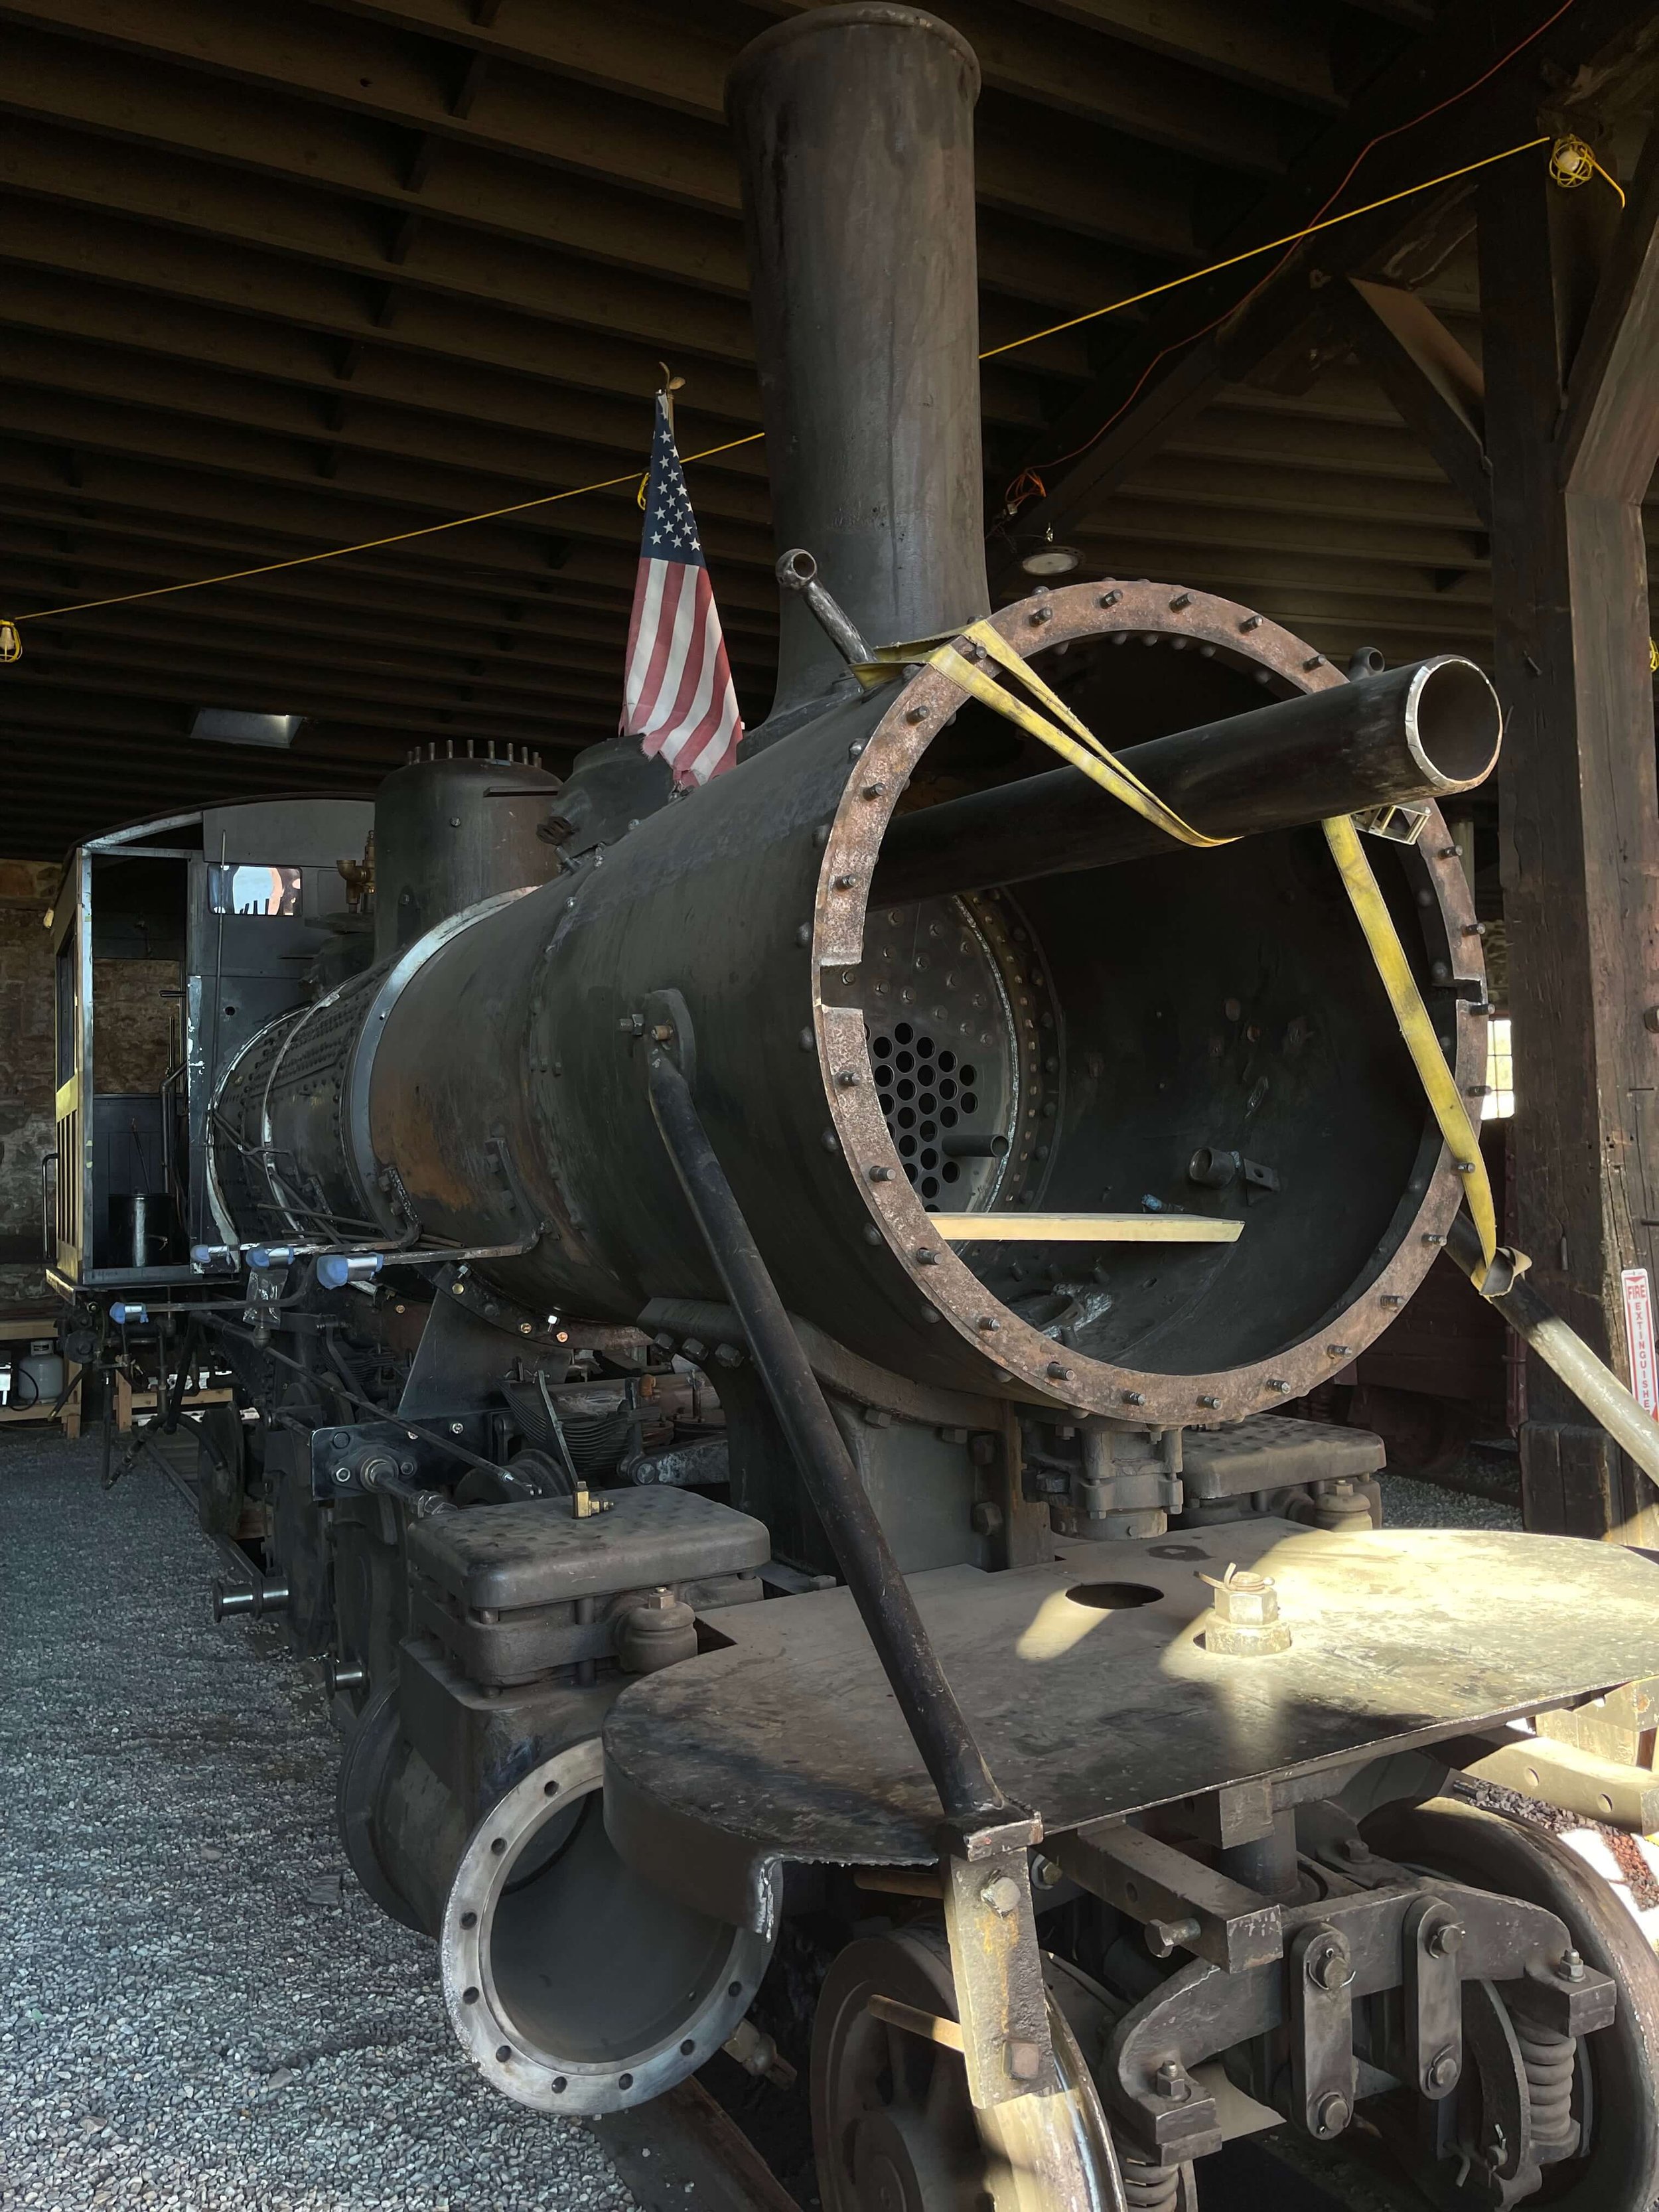  Beloved Klondike Kate #4 in the roundhouse awaiting the completion of her conversion from wood firing to oil.  